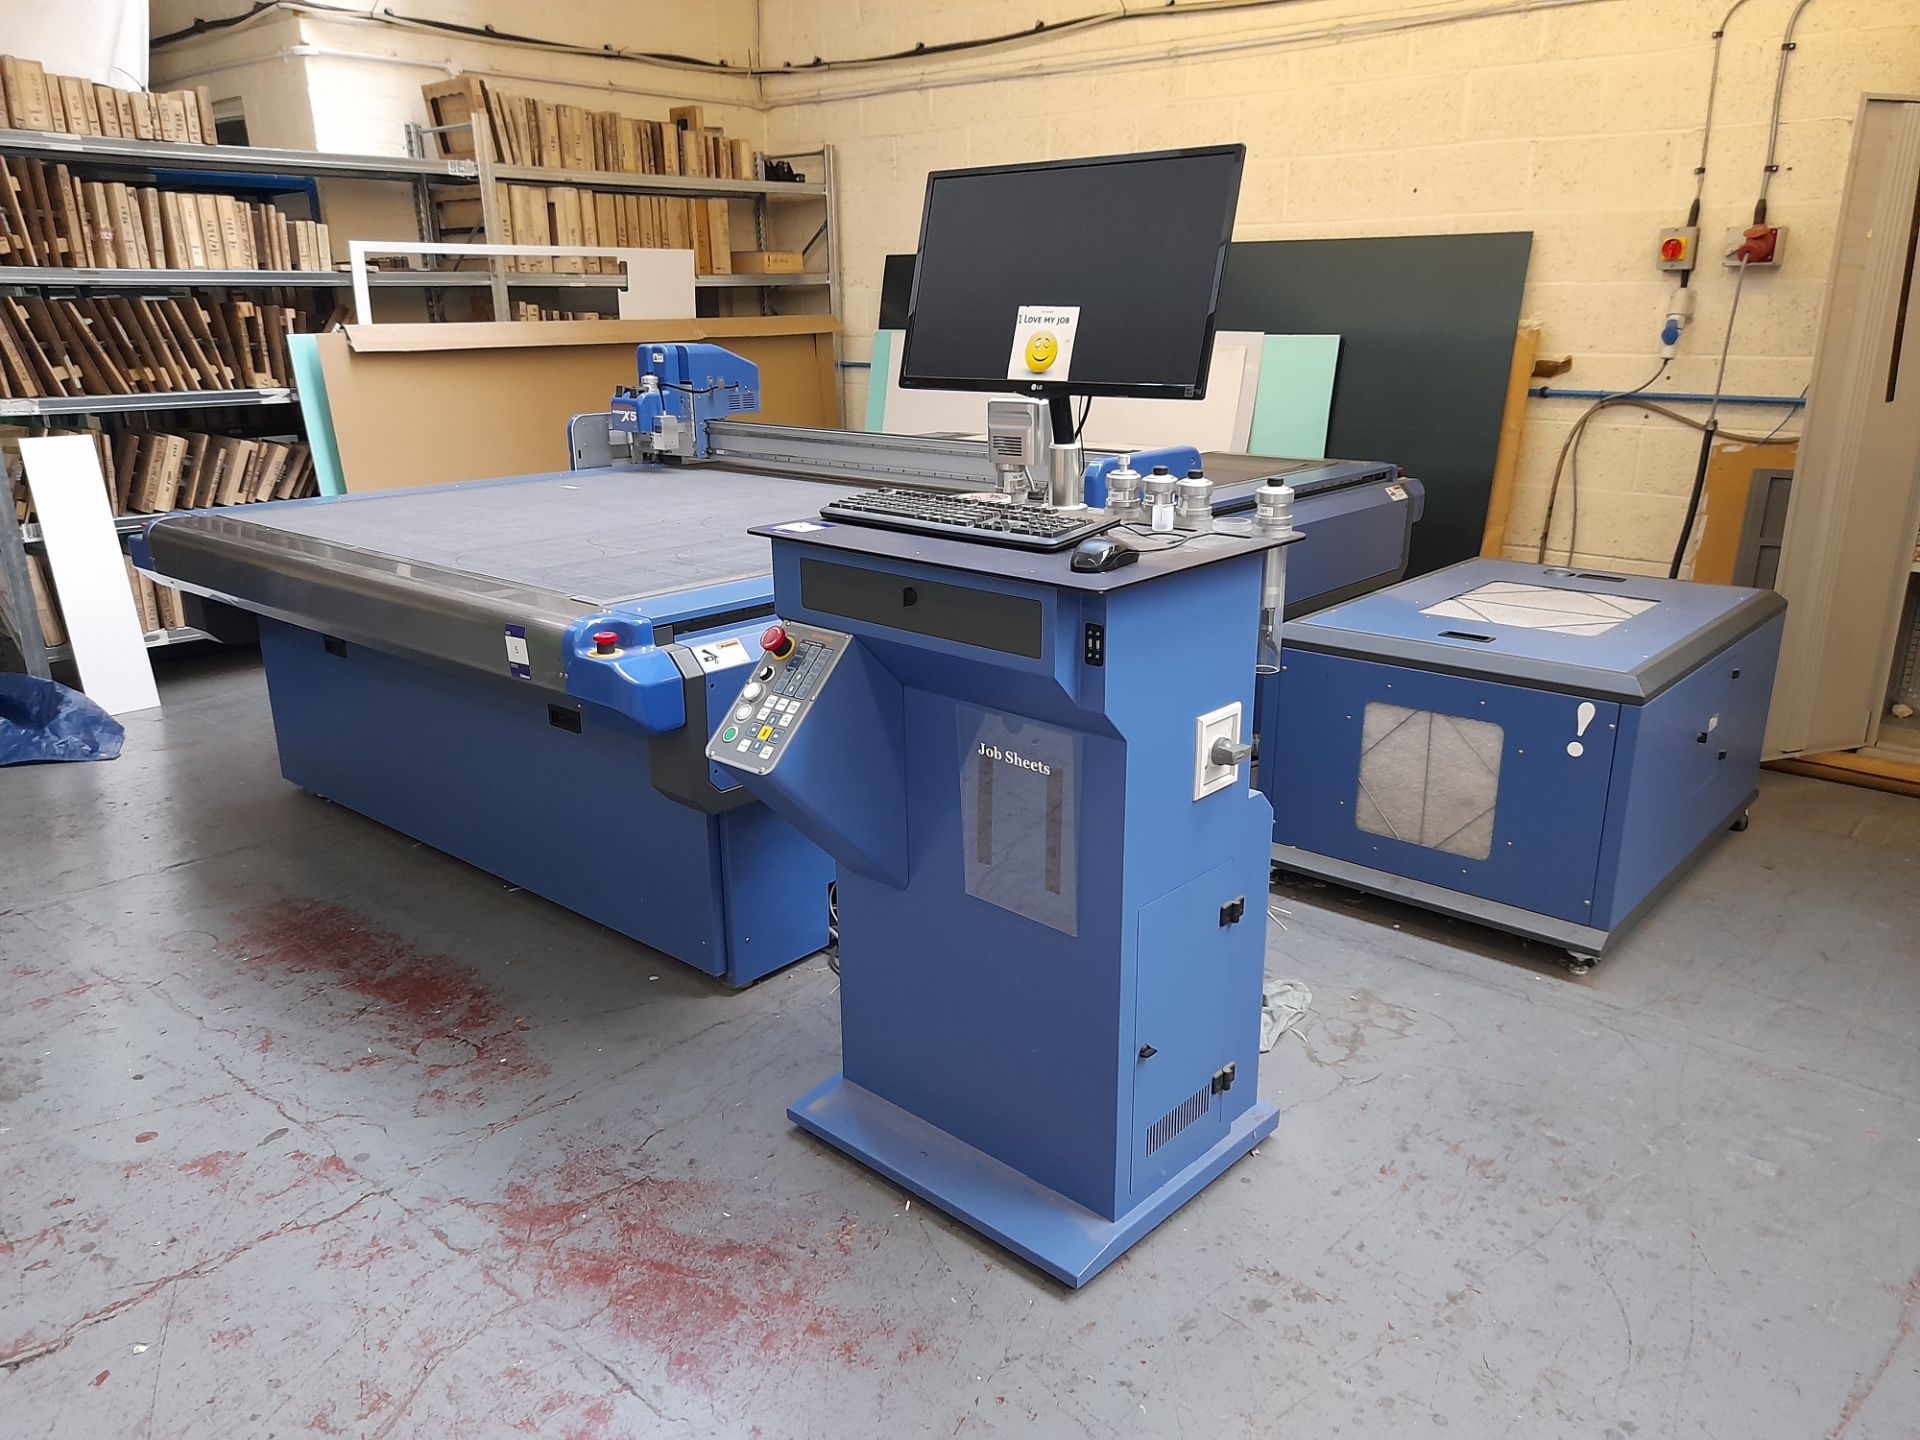 Dyss X5 Digital Die Cutter, serial number 1625TNKC160401, manufactured April 2016, with controls and - Image 2 of 11